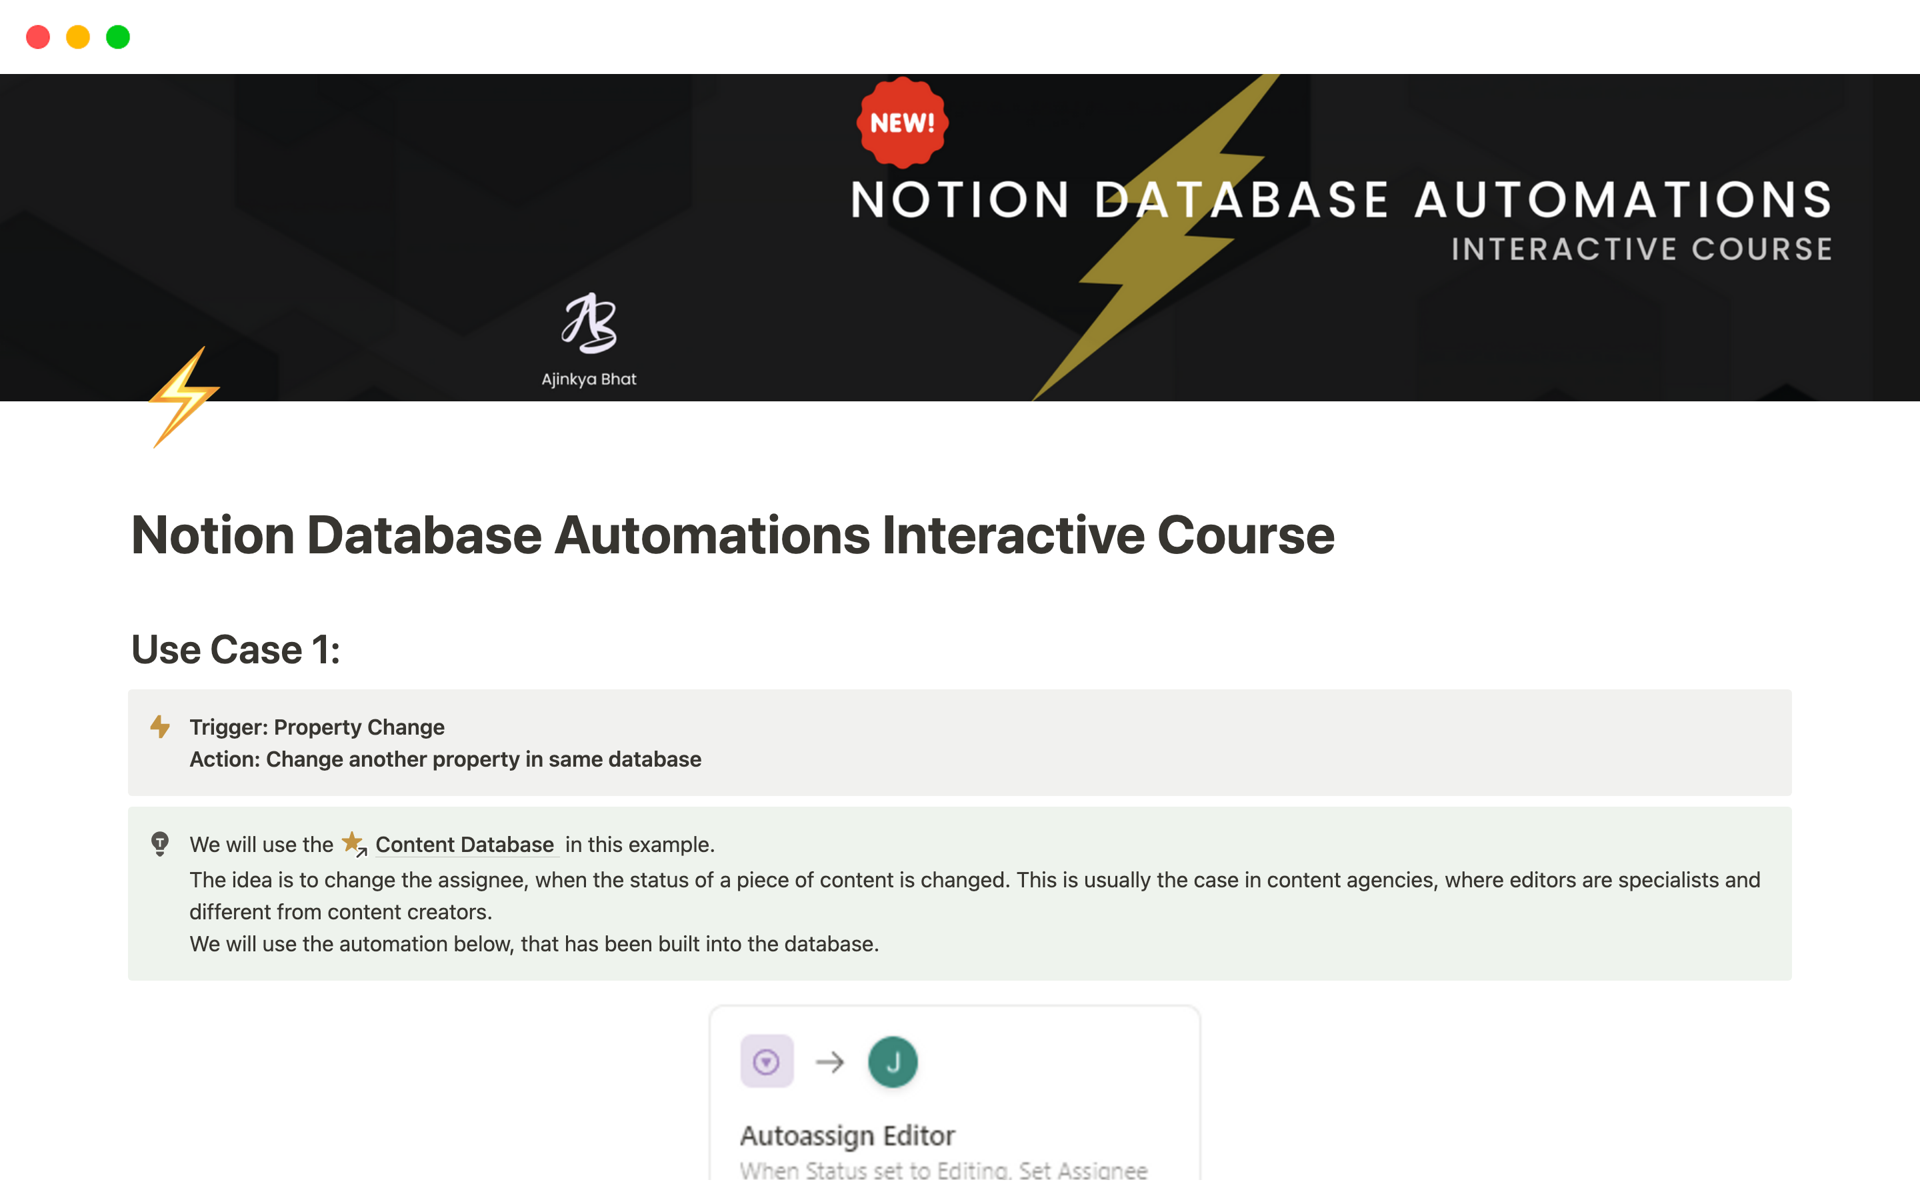 Interactive Walkthrough for Notion's Newest Feature- Database Automations!